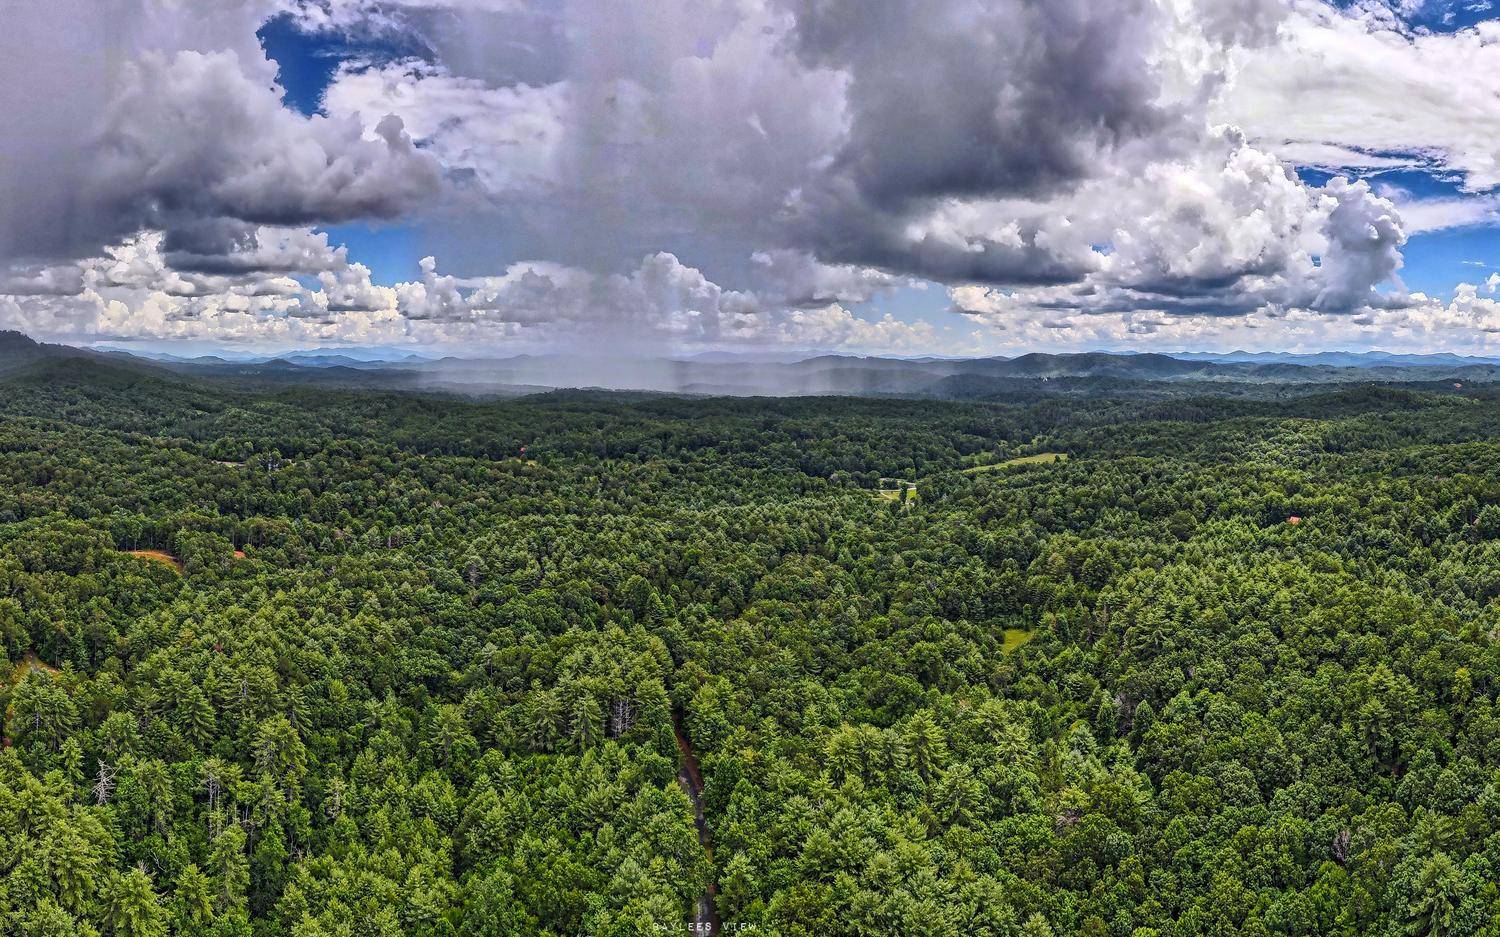 A growing community that could serve as a great investment property, rental property, or a great site to build your forever home here in the mountains! 6.9 acres located in a subdivision that offers wooded and private acres for seclusion. Picture this - potential long range, year round mountain views from your porch that is your ultimate relaxation spot. Location close to the NC border but also convenient to historic DT Blue Ridge for shopping and restaurants, hiking trails galore, mountain biking opportunities, Lake Blue Ridge fun, and other area attractions!